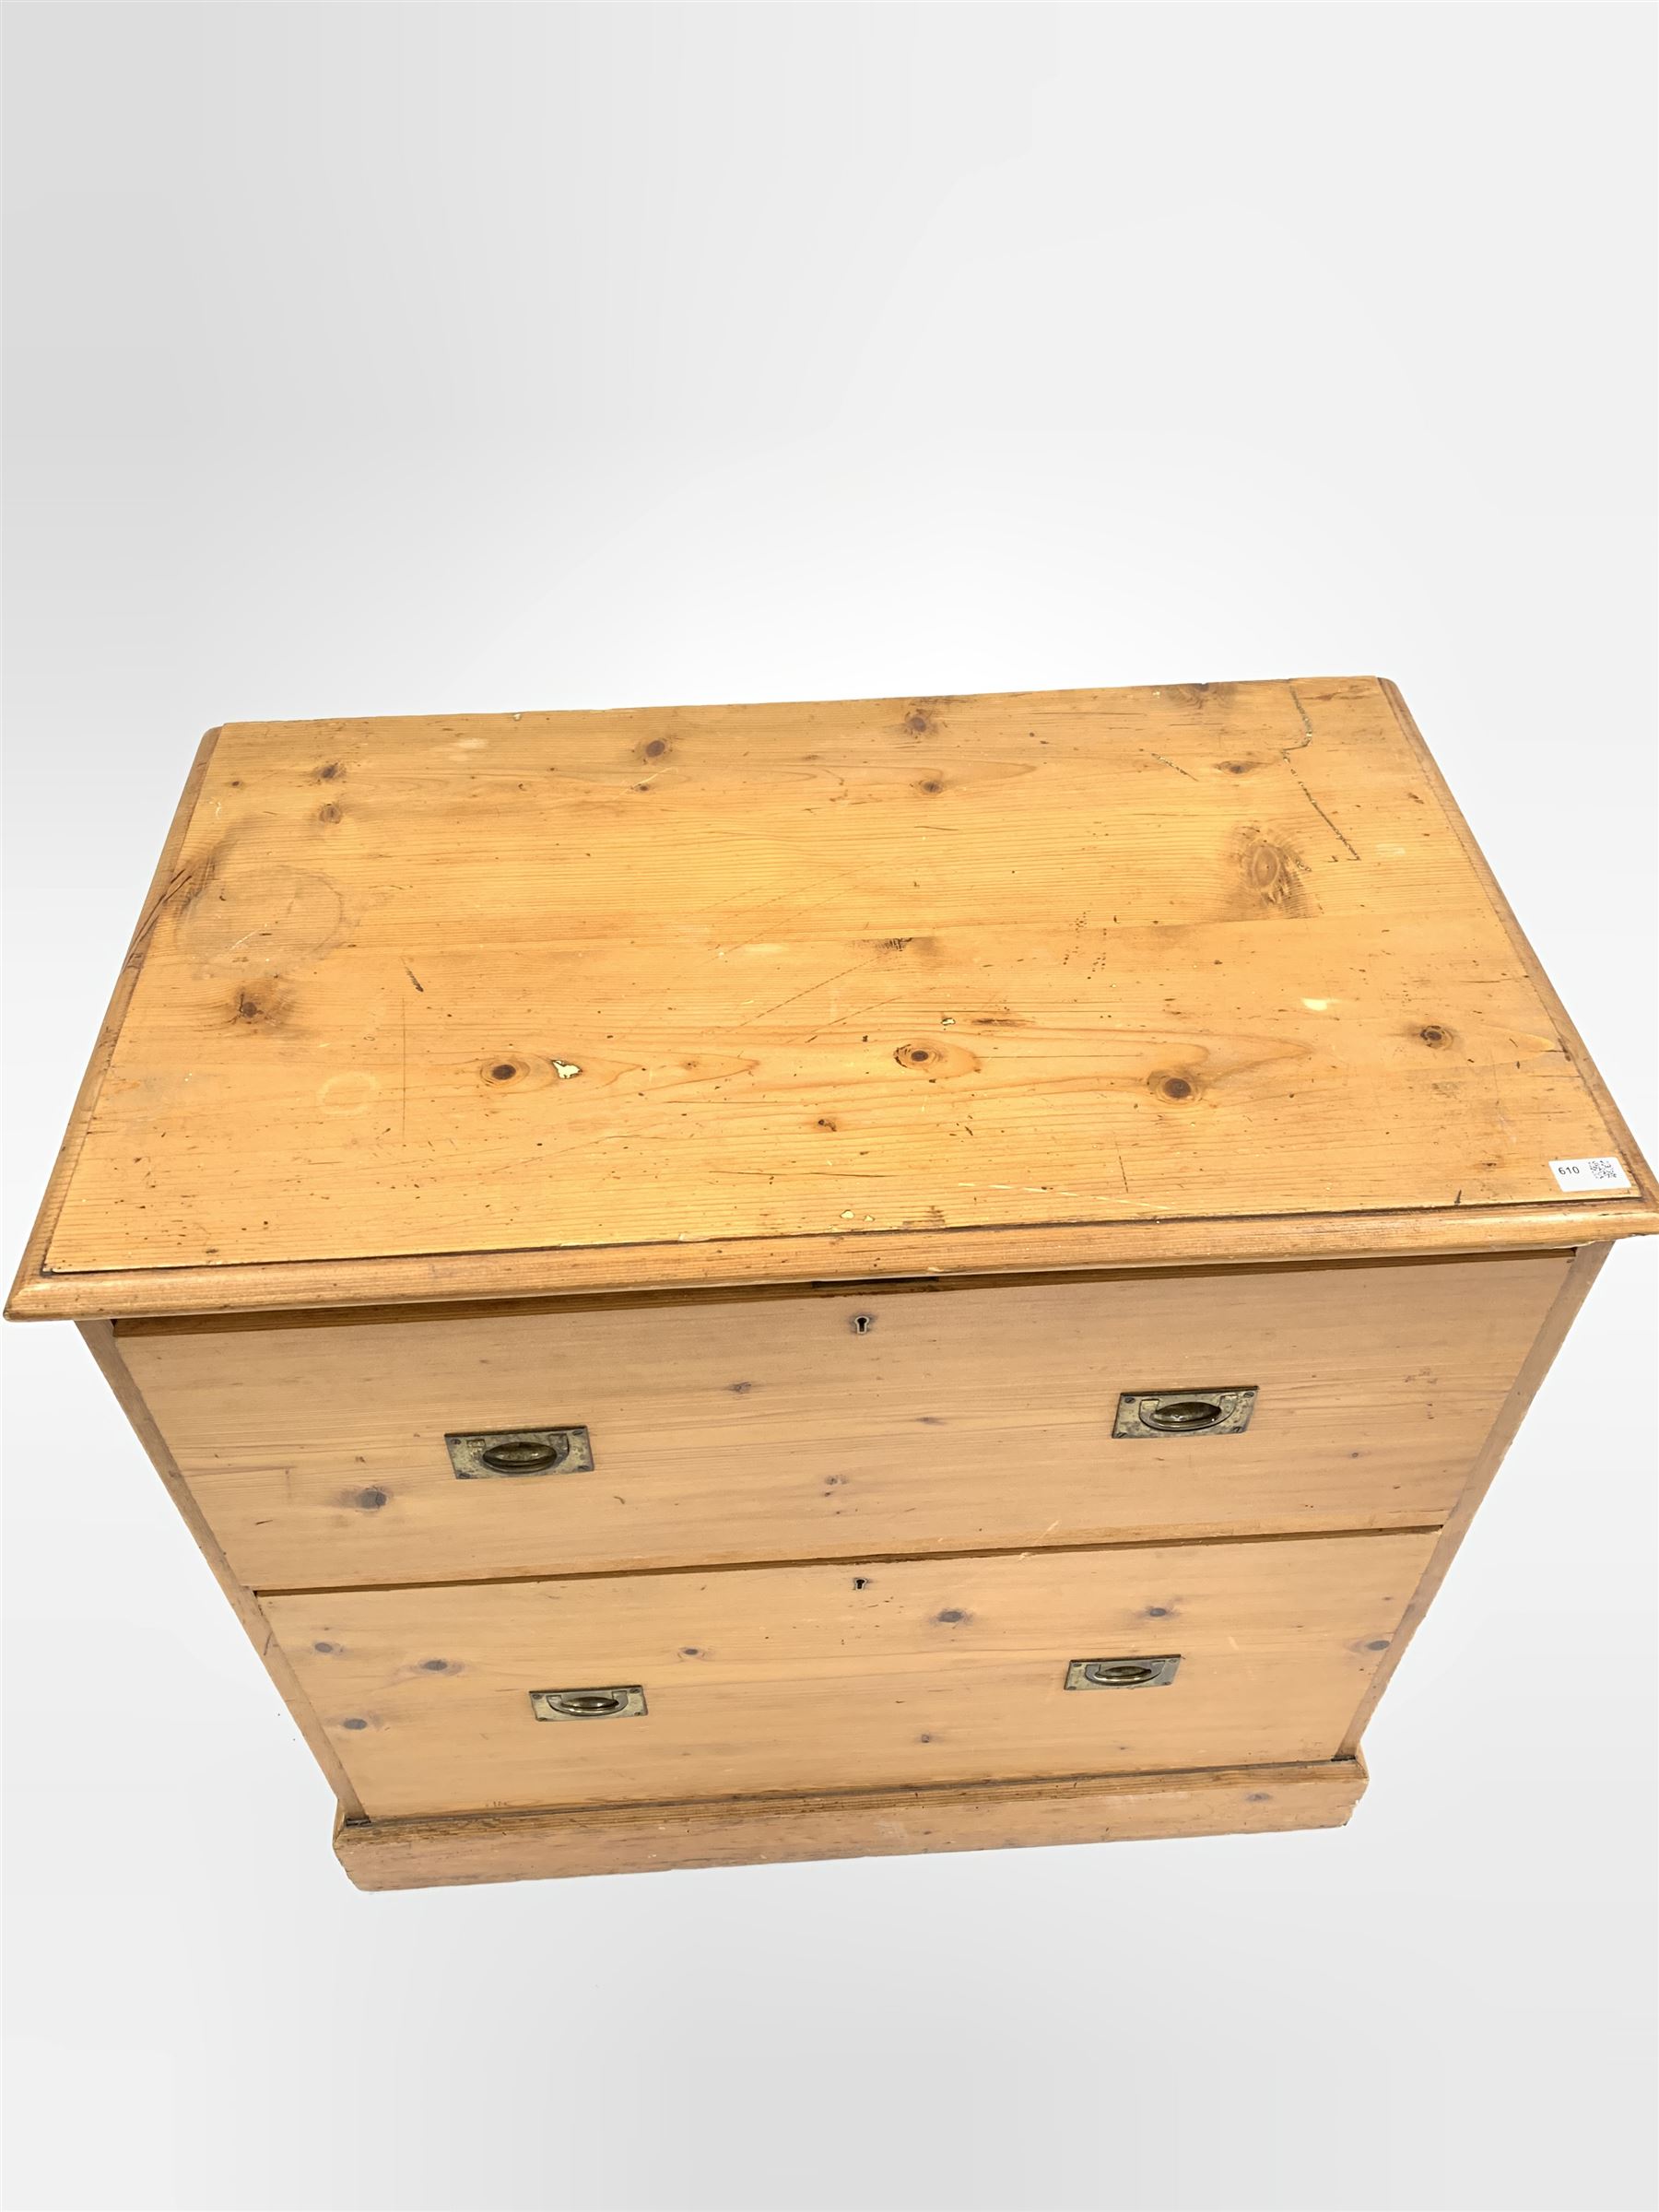 19th century pine campaign style chest - Image 5 of 5